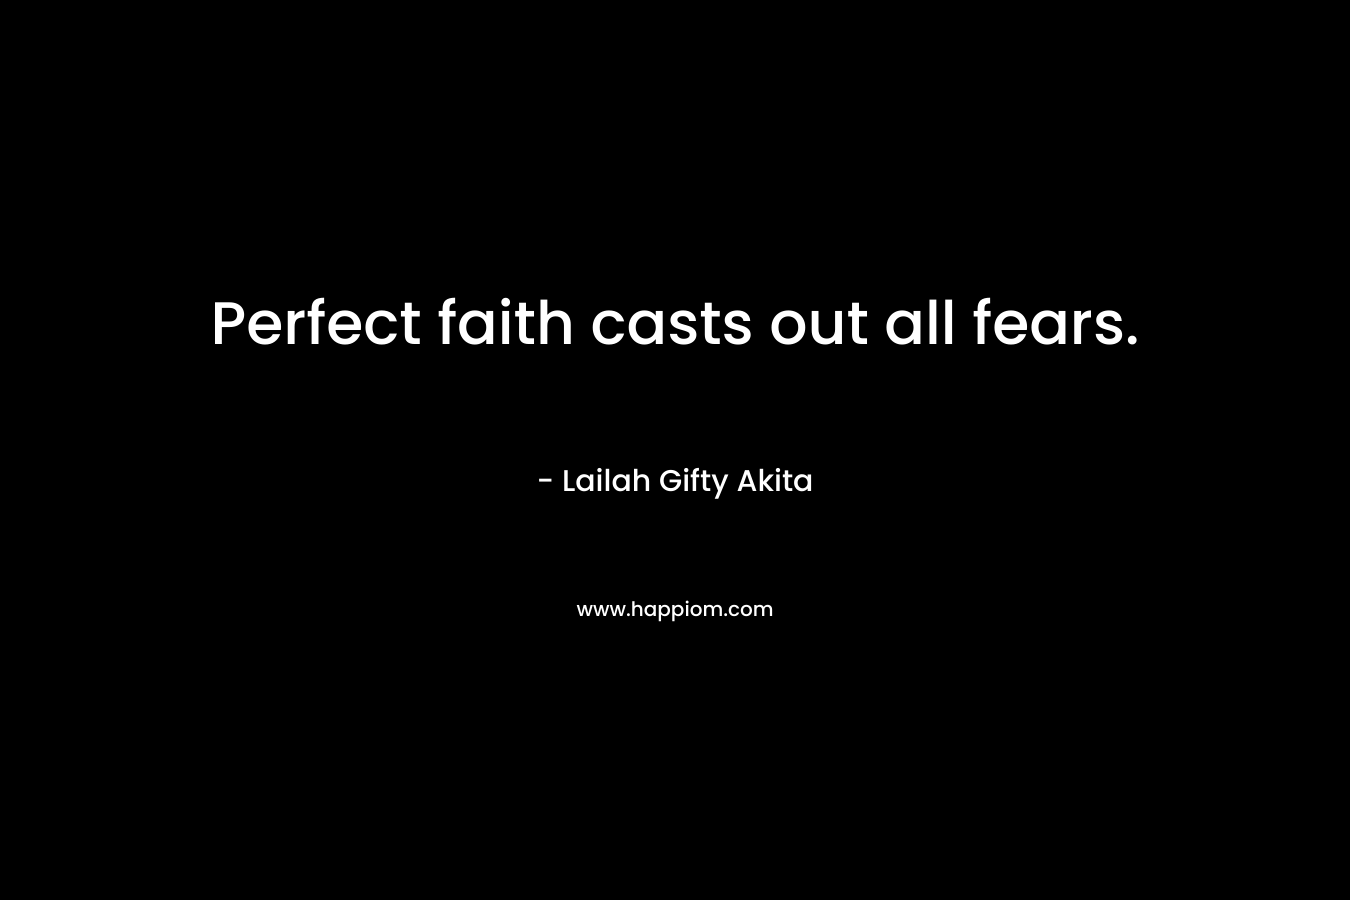 Perfect faith casts out all fears.